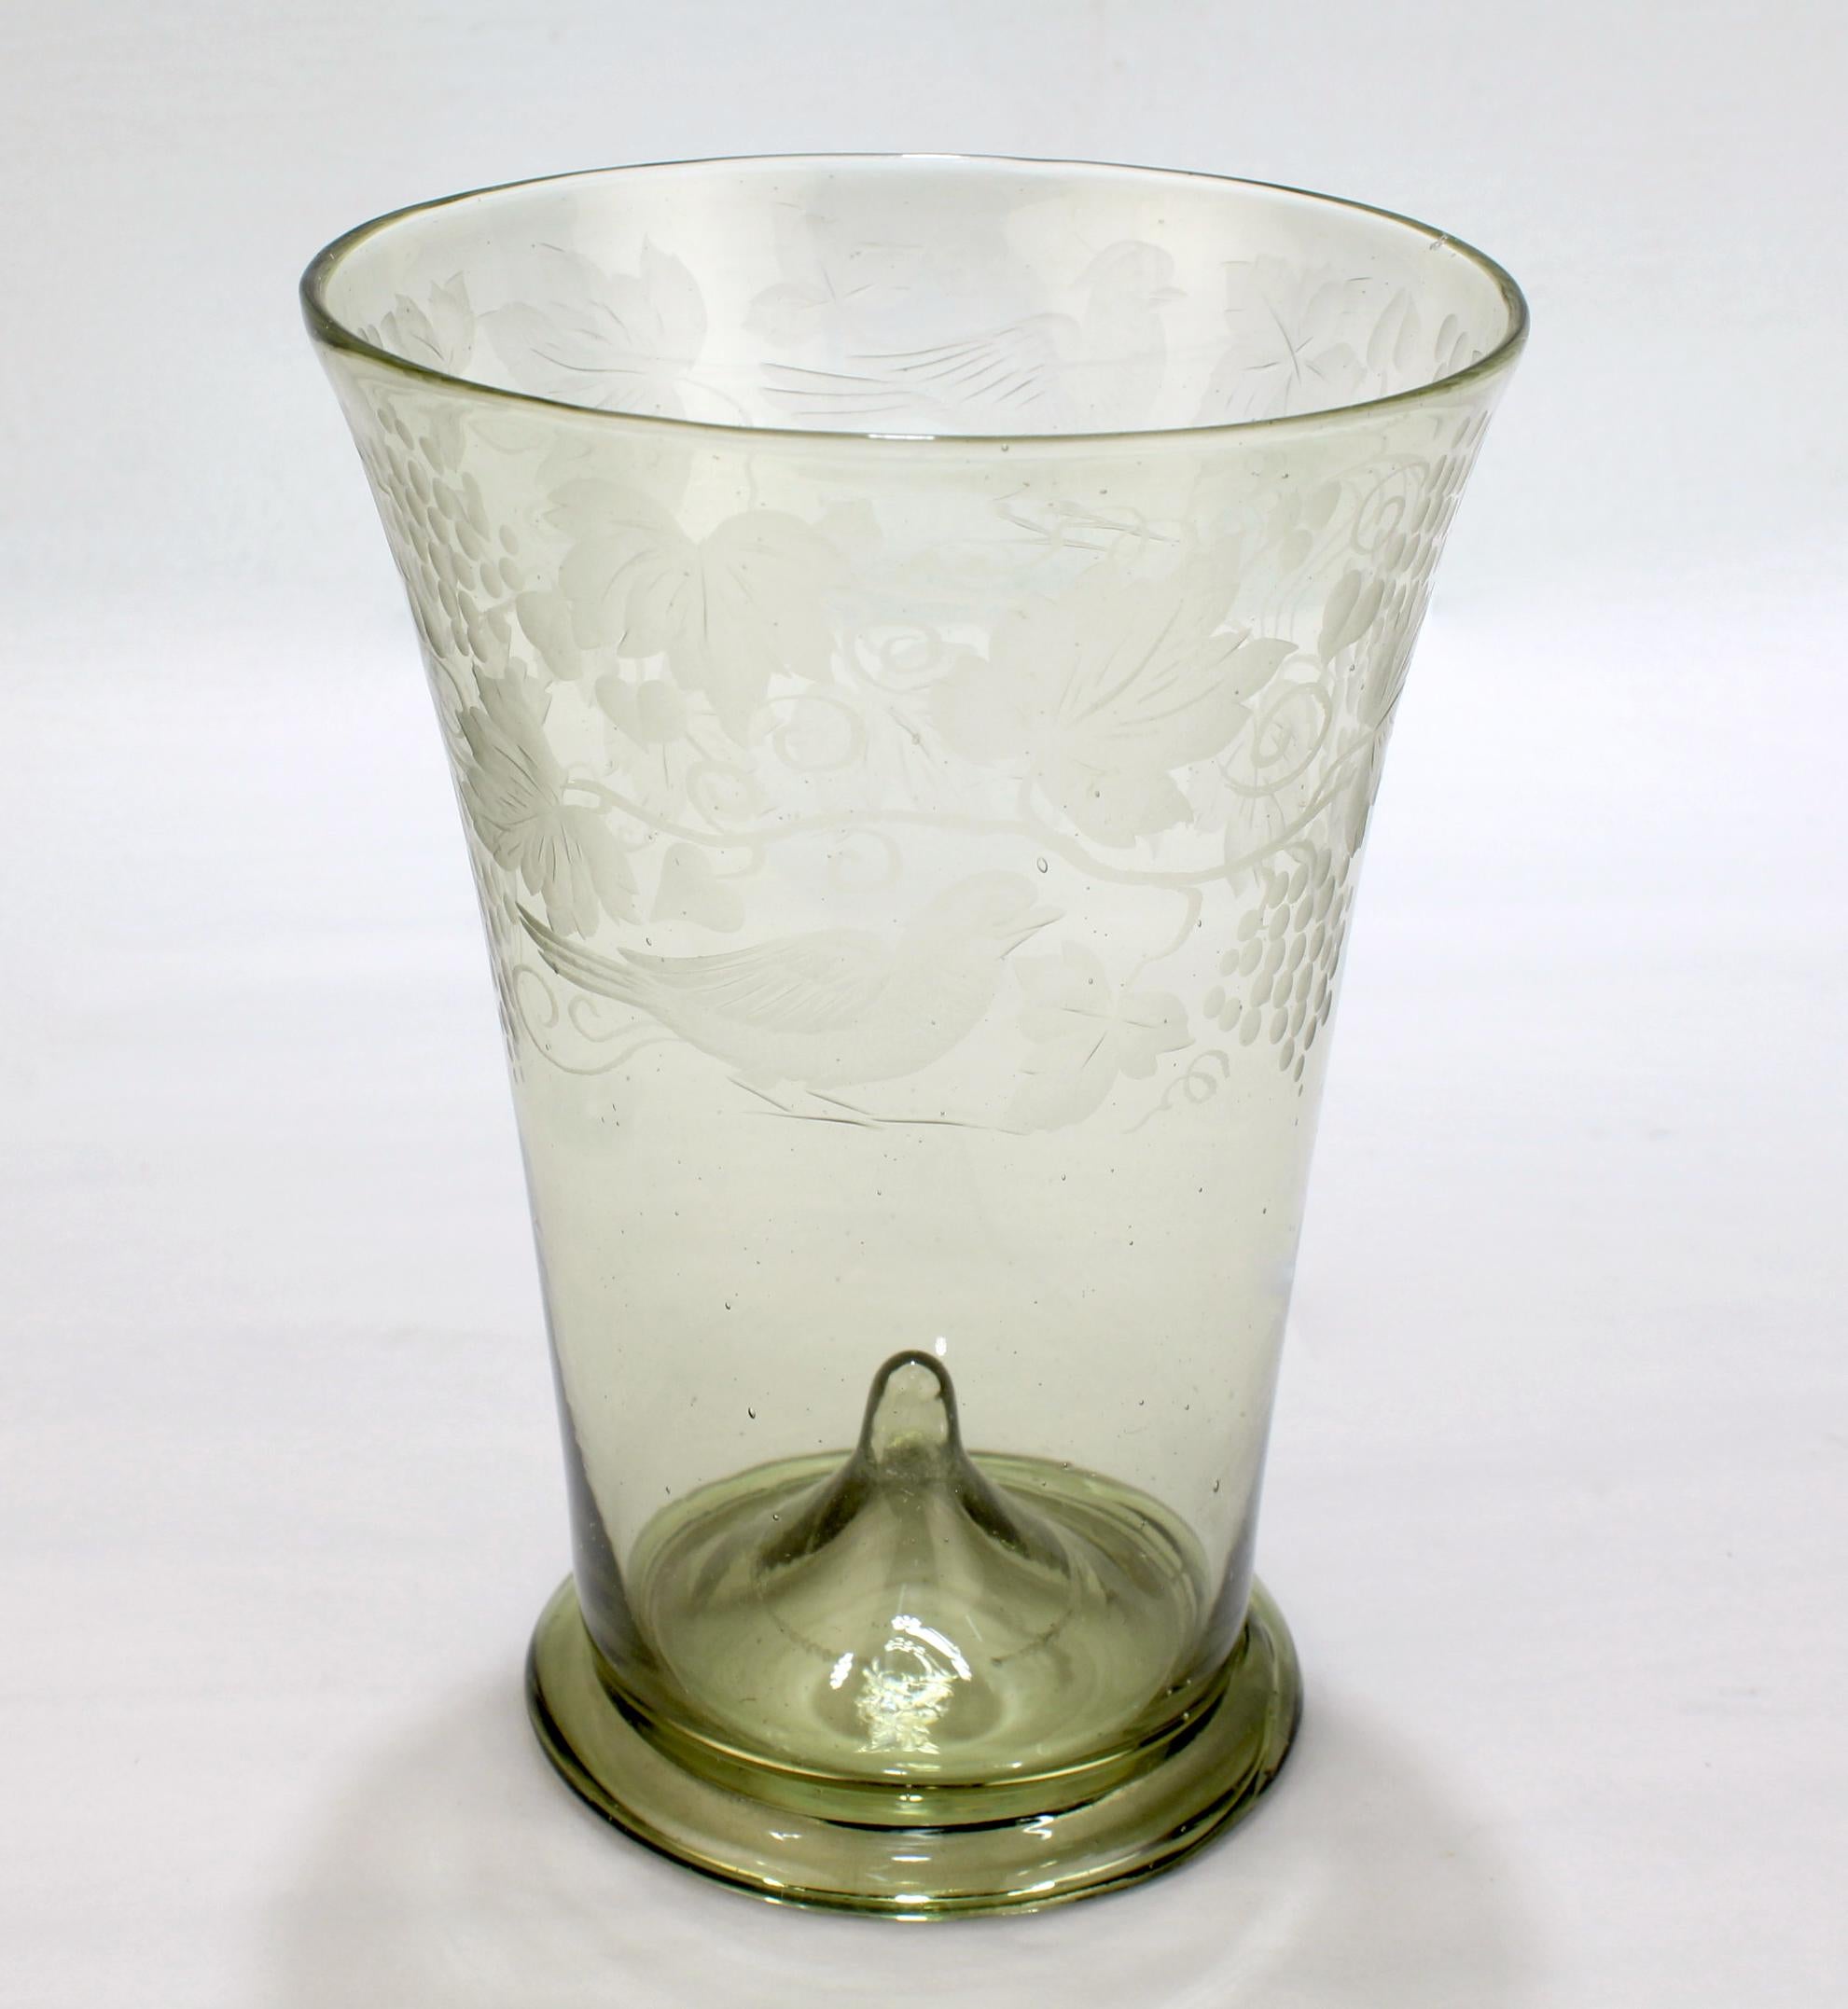 A fine antique Bohemian glass tumbler cup or mug.

The tumbler is a central European Historicism Period reproduction of a Middle Ages 'Waldglas Becher', having a flared lip, folded foot, and pushed up pontil mark. 

The circumference is engraved